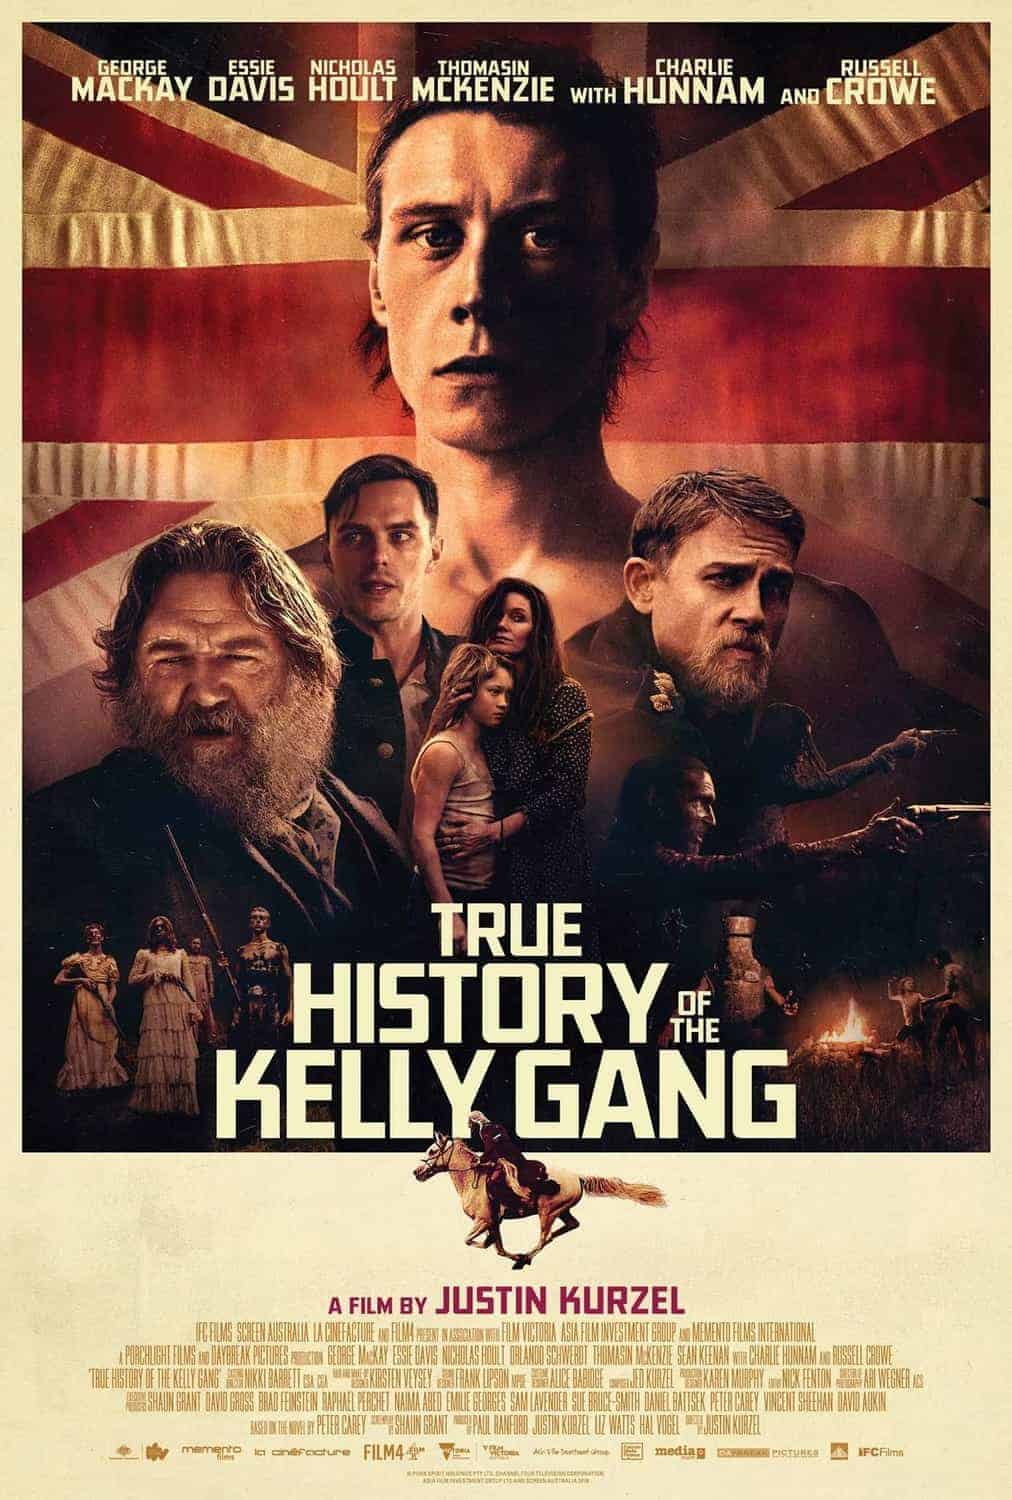 True History of the Kelly Gang IFC film review 18